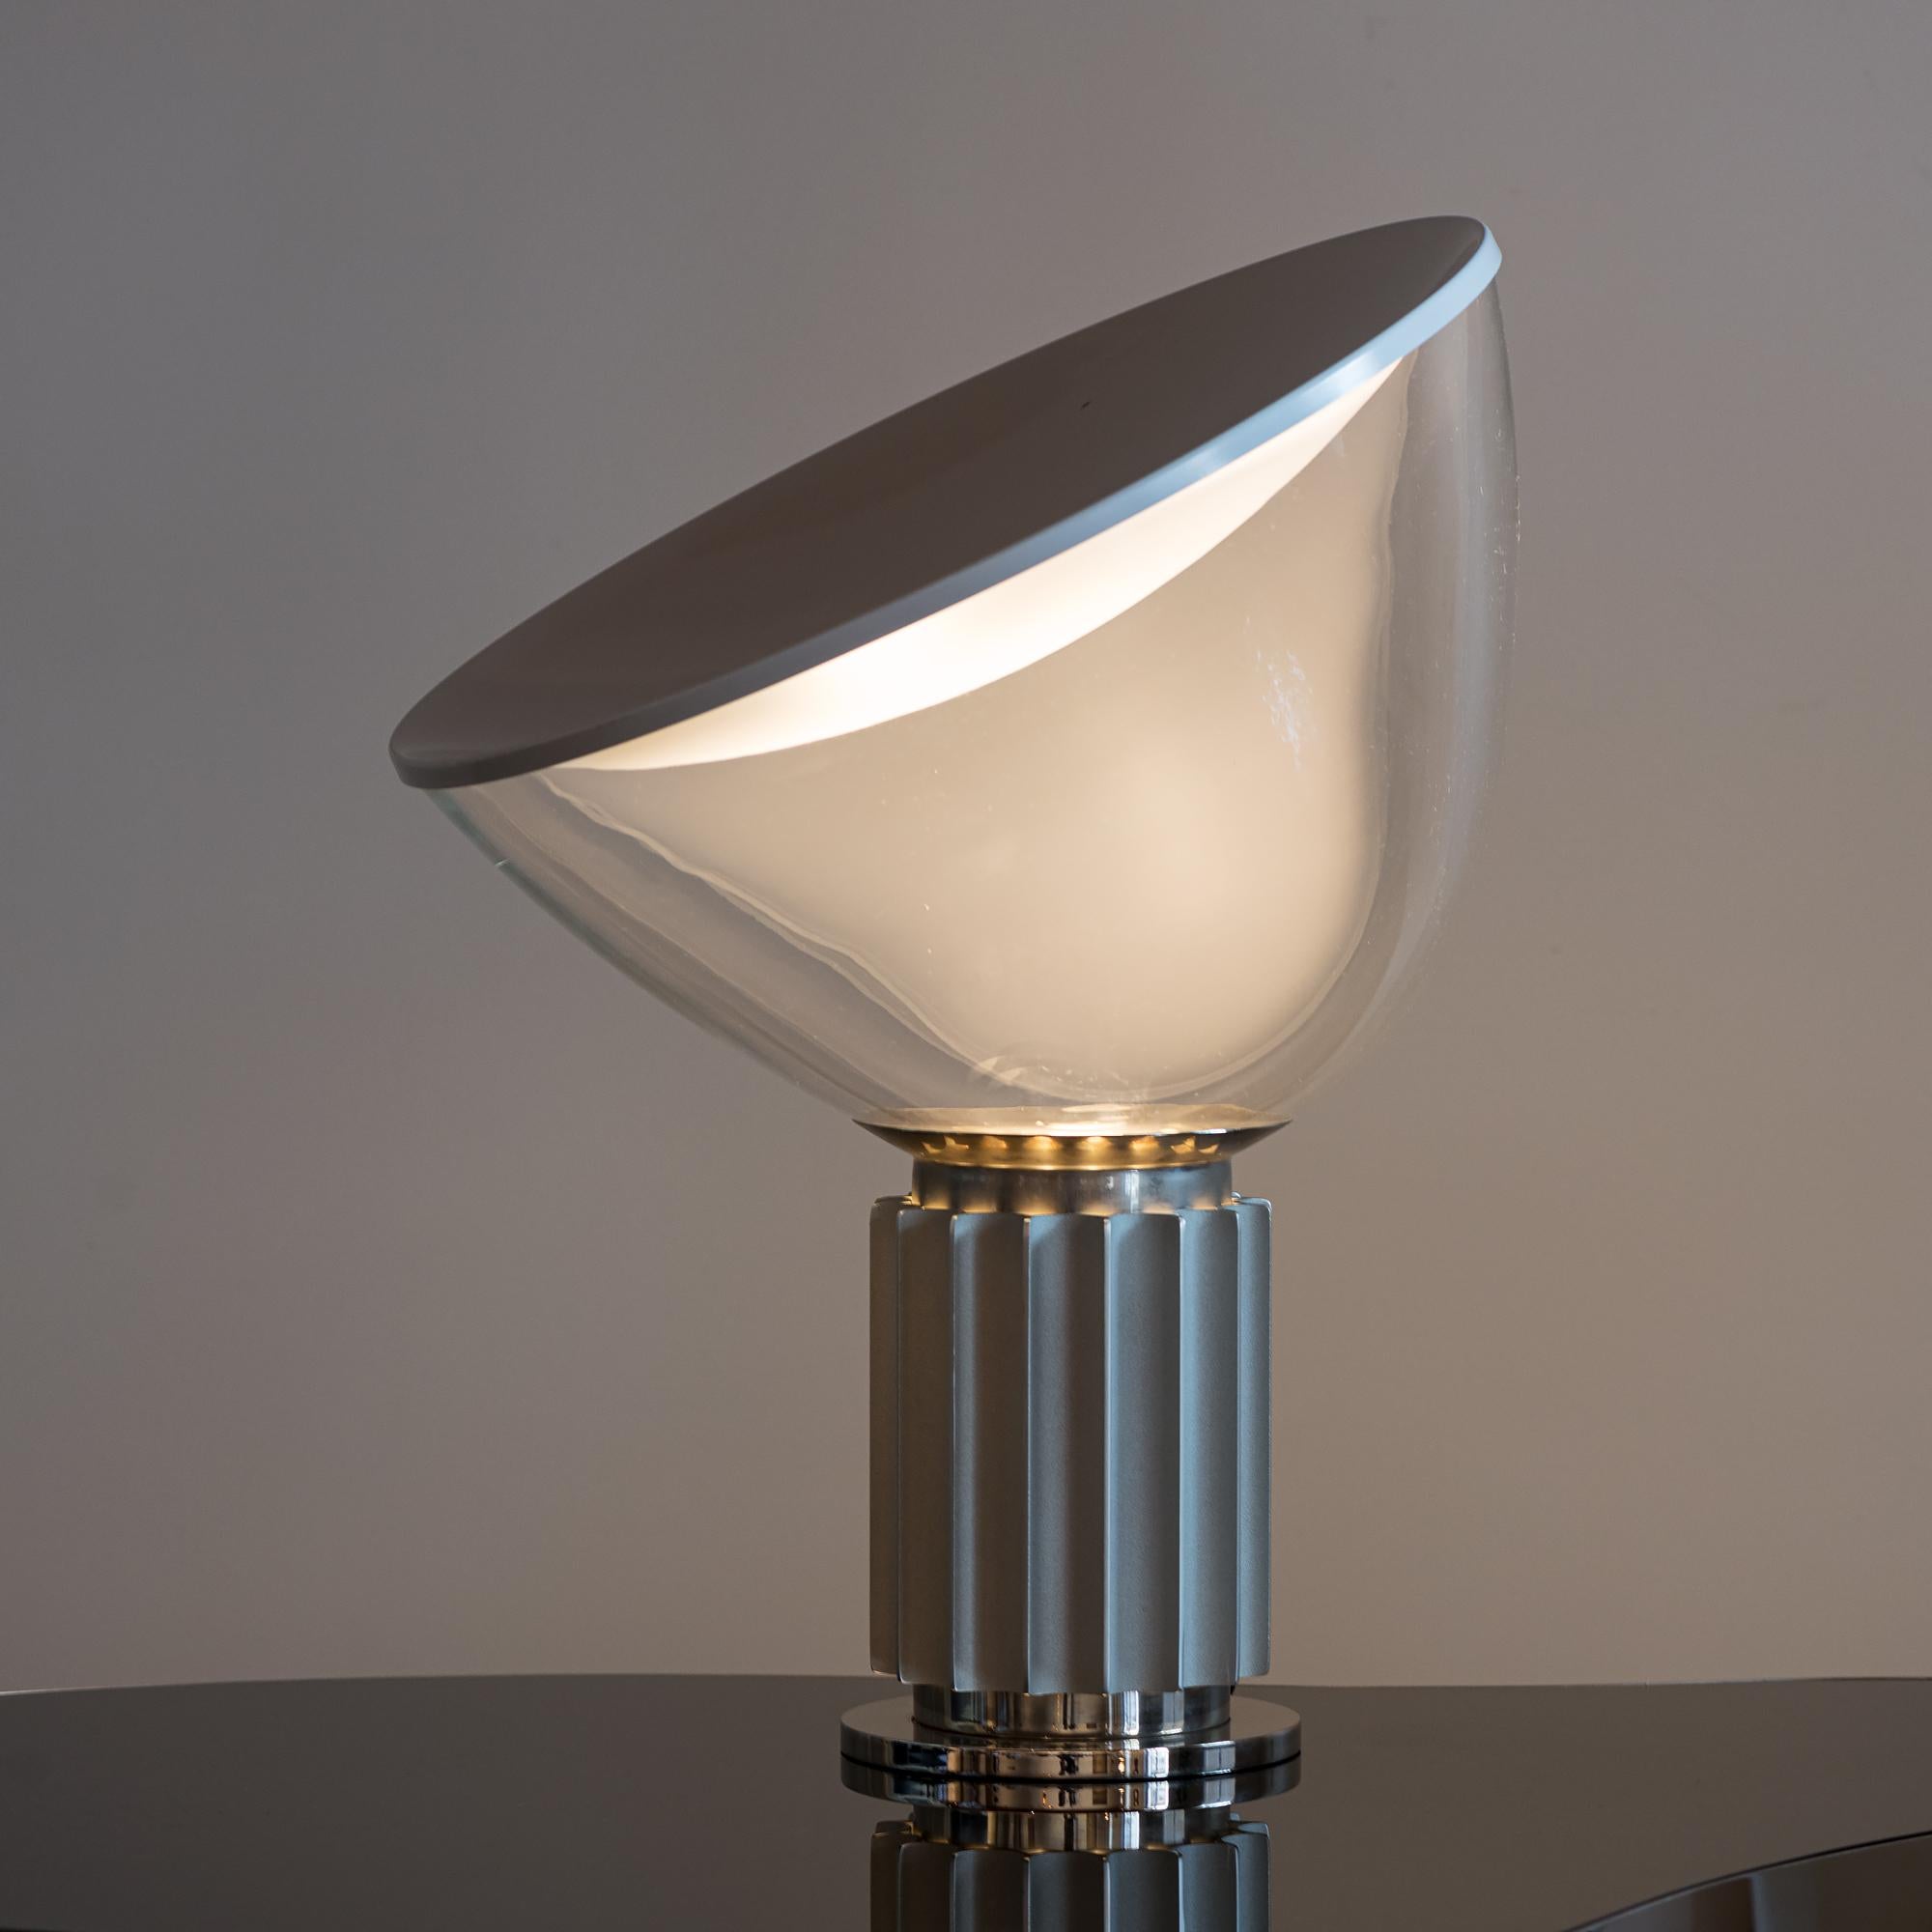 Iconic Taccia lamp by Achille and Pier Giacomo Castiglioni in aluminum and blown glass. Italy, 1962. This example from the late 20th century.